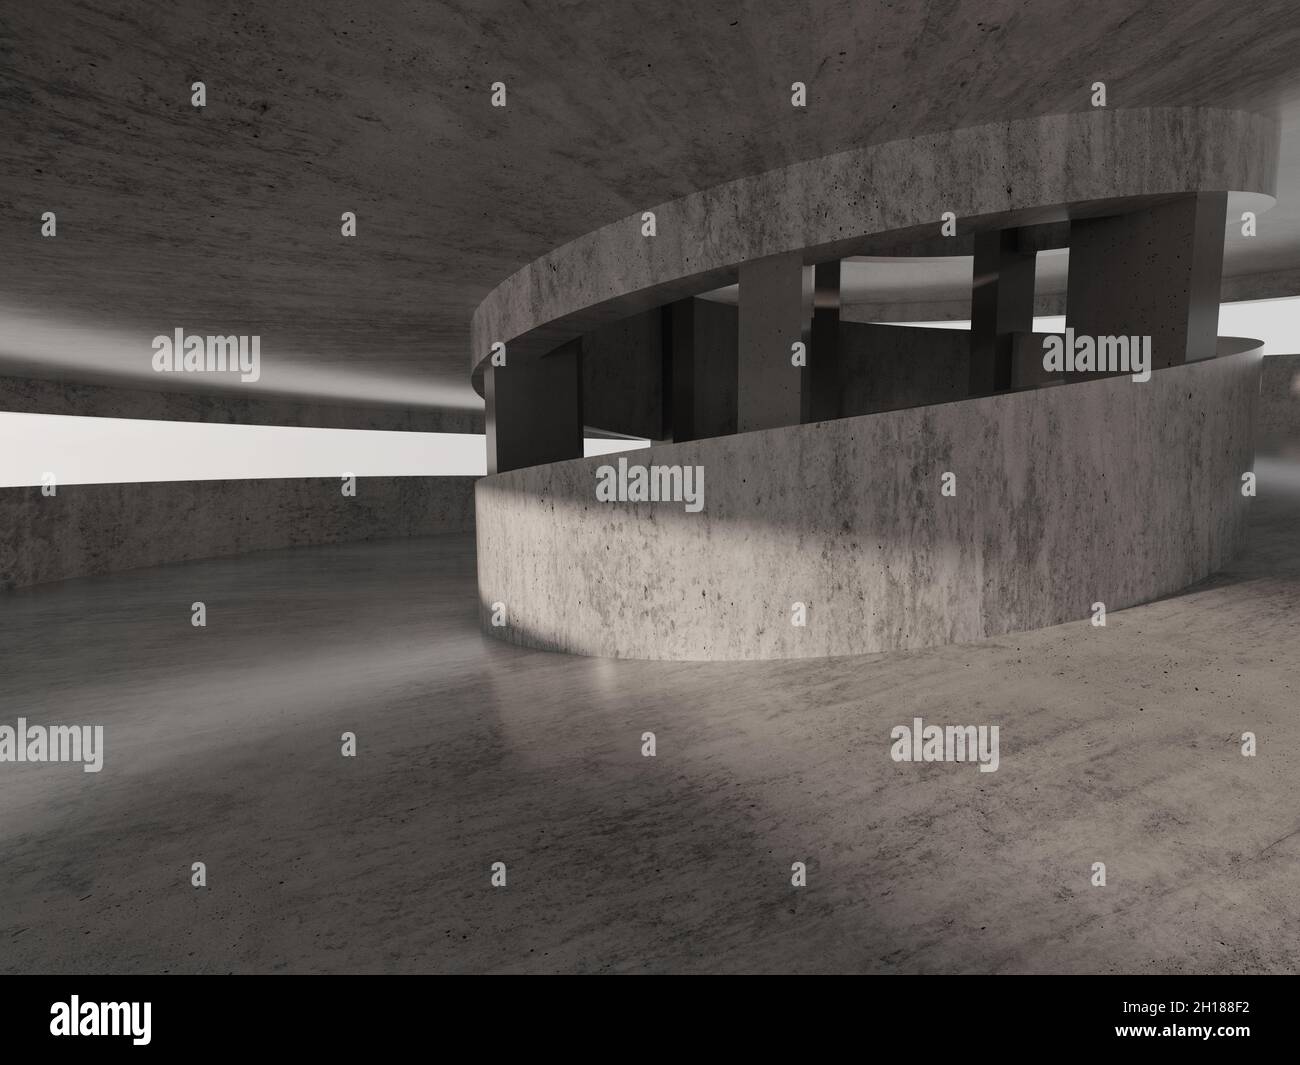 Empty spiral ramp interior. Abstract industrial architecture background. 3d rendering illustration Stock Photo